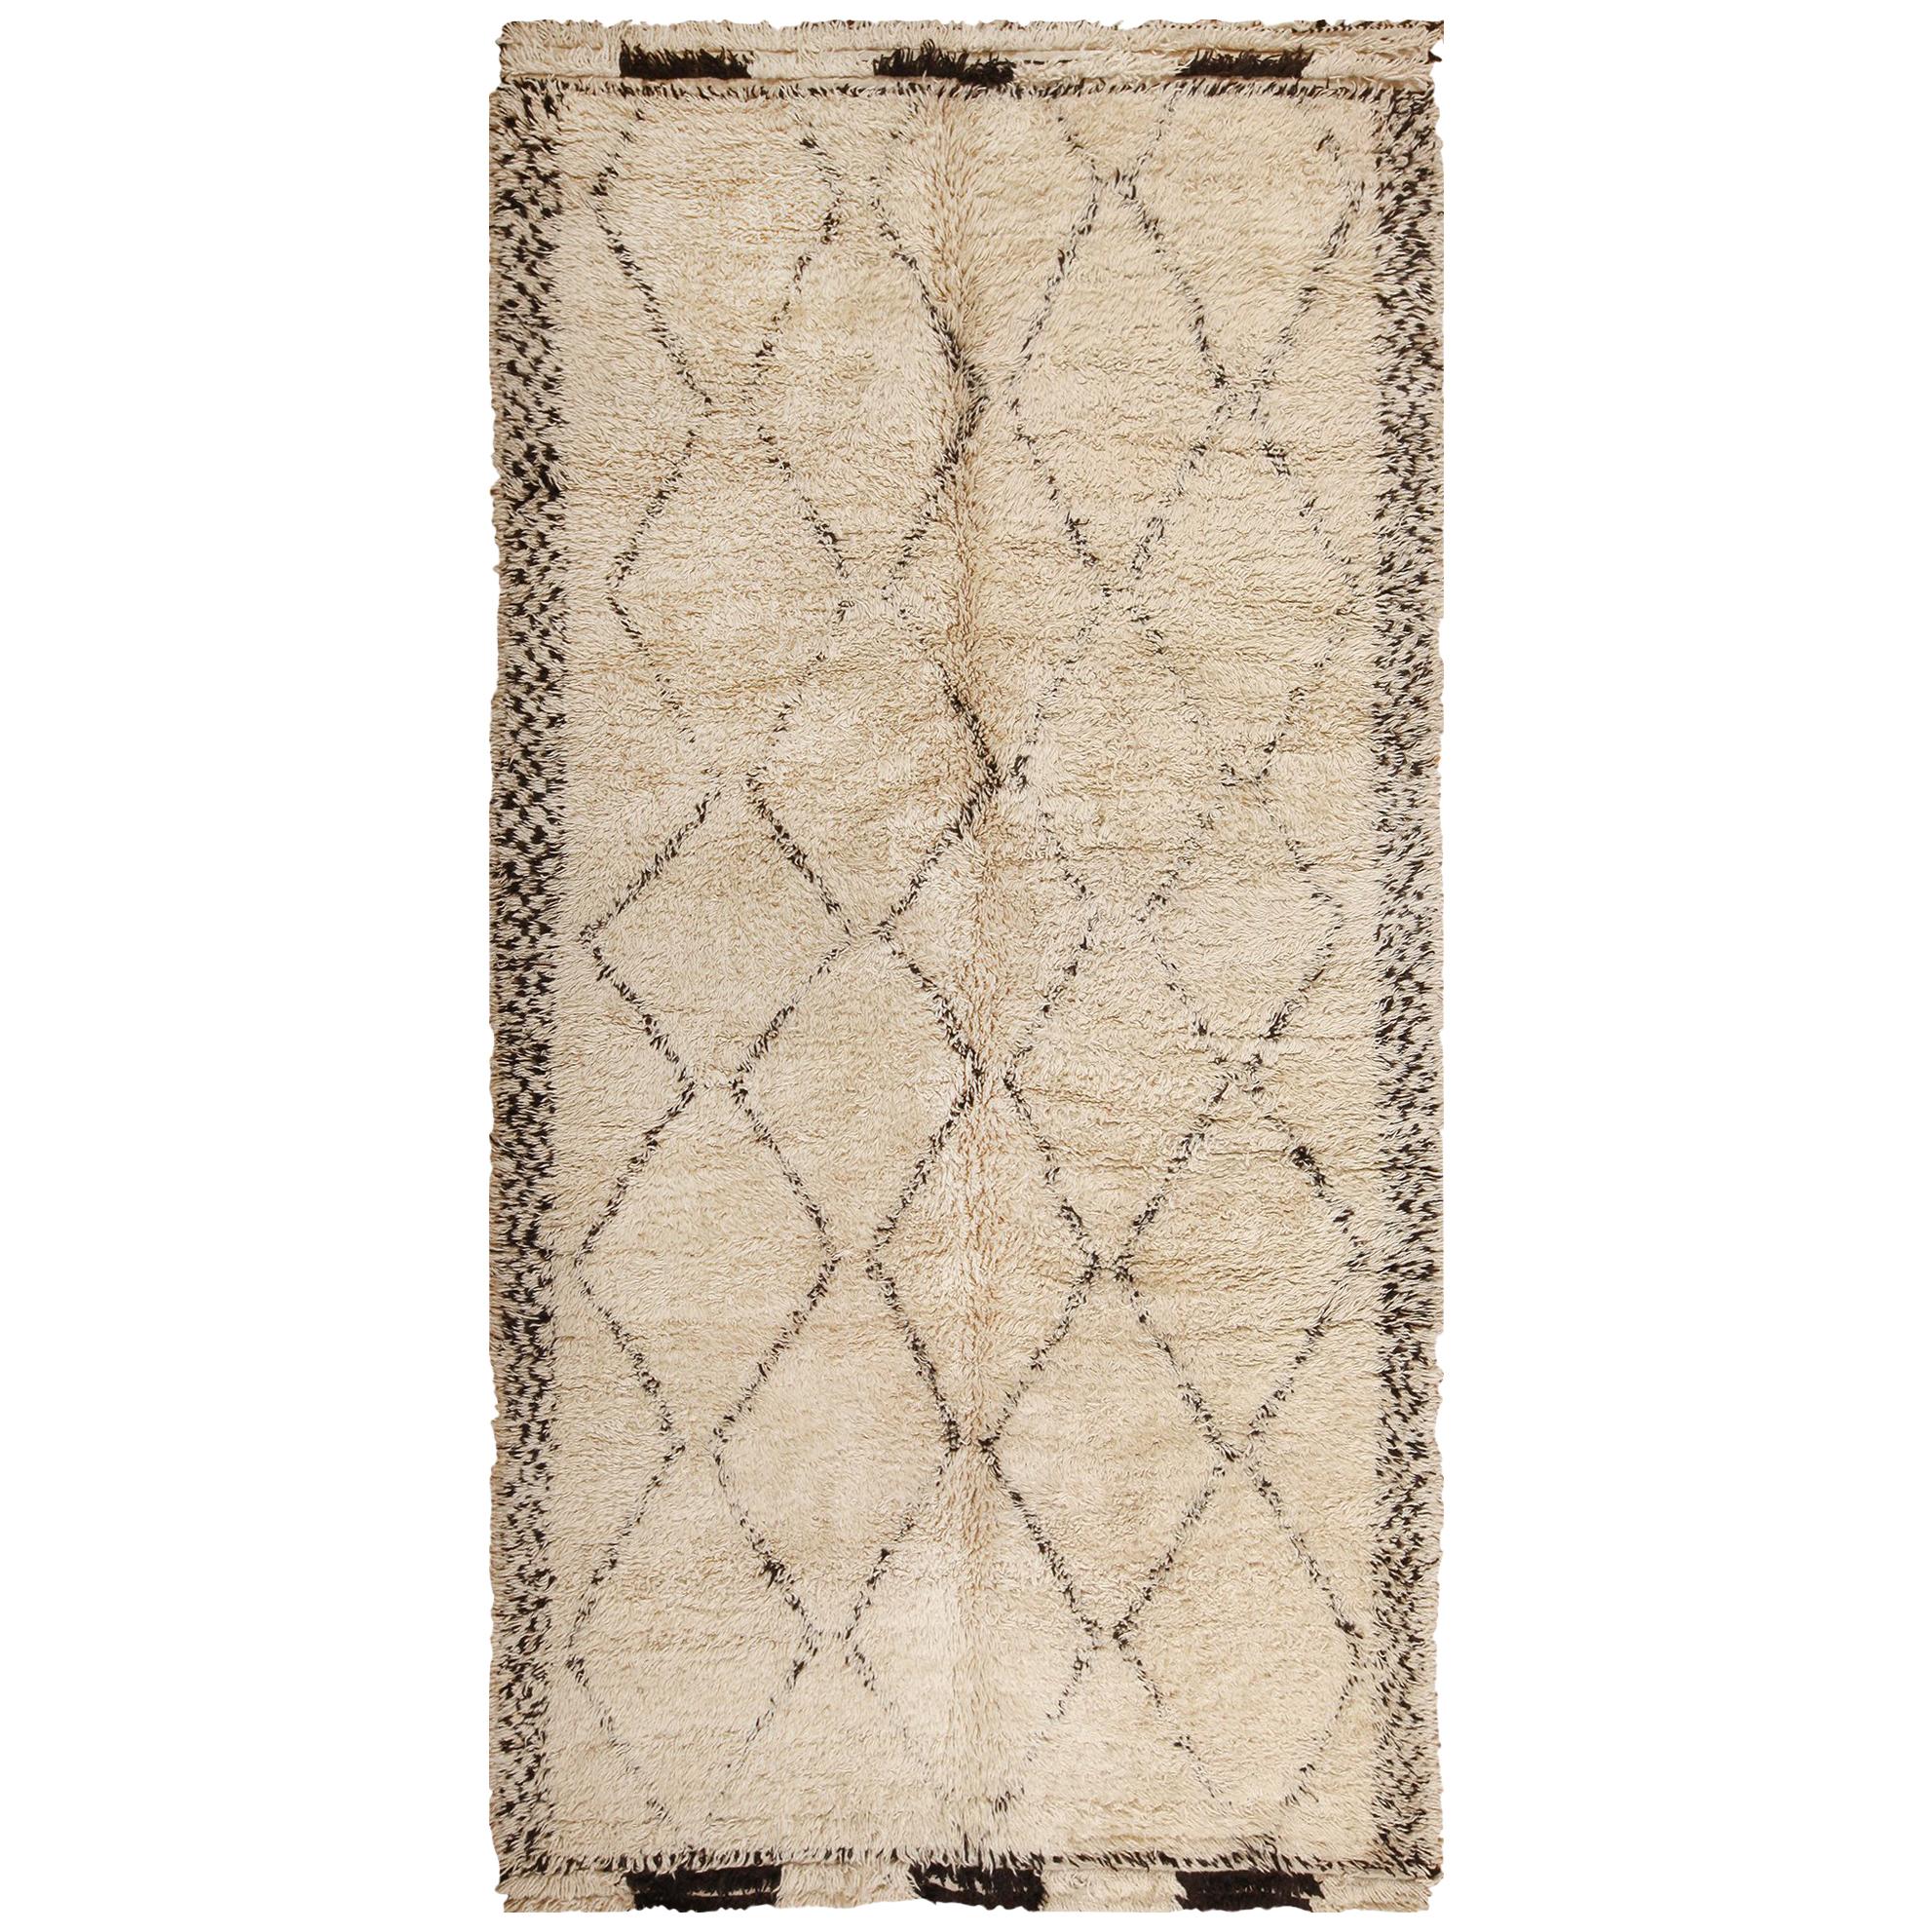 Vintage Ivory Shag Moroccan Beni Ourain Rug. Size: 6 ft 3 in x 12 ft 2 in